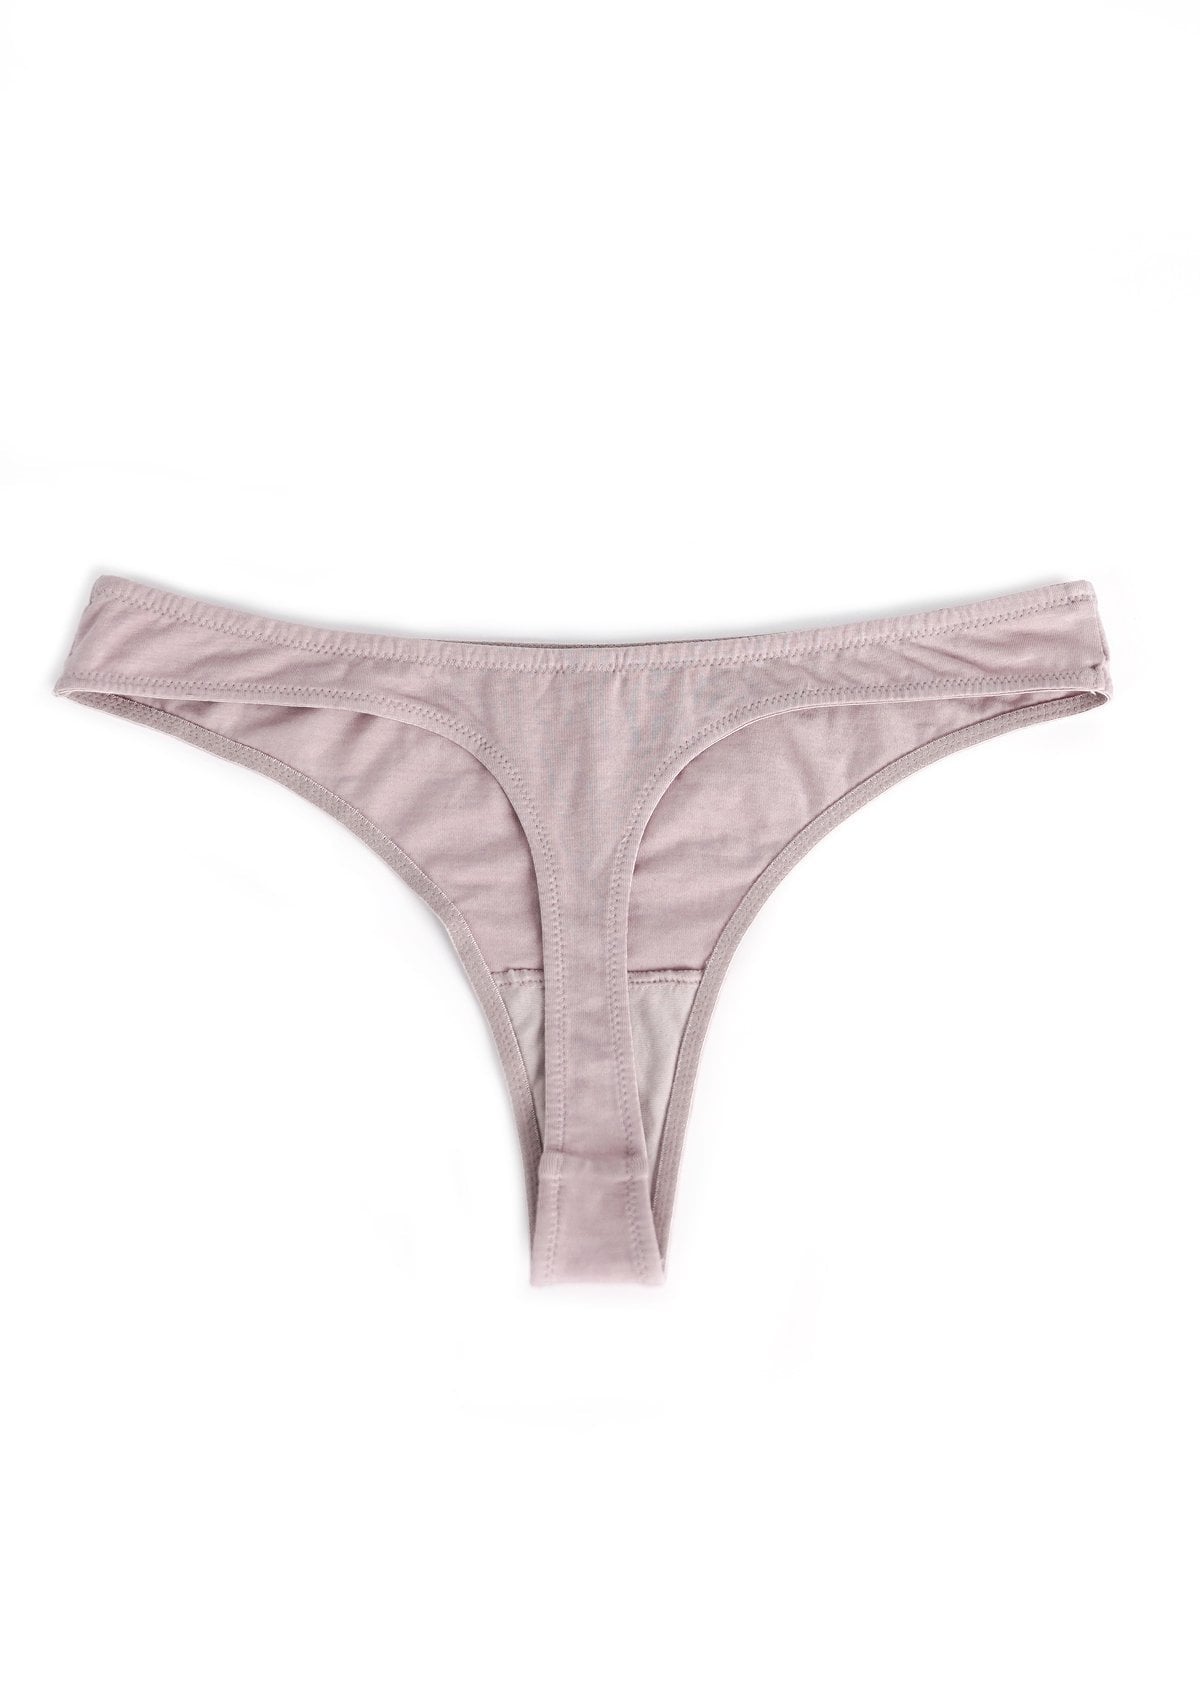 HSIA Comfort Cotton Thongs 3 Pack - L / Beige+Black+Pink